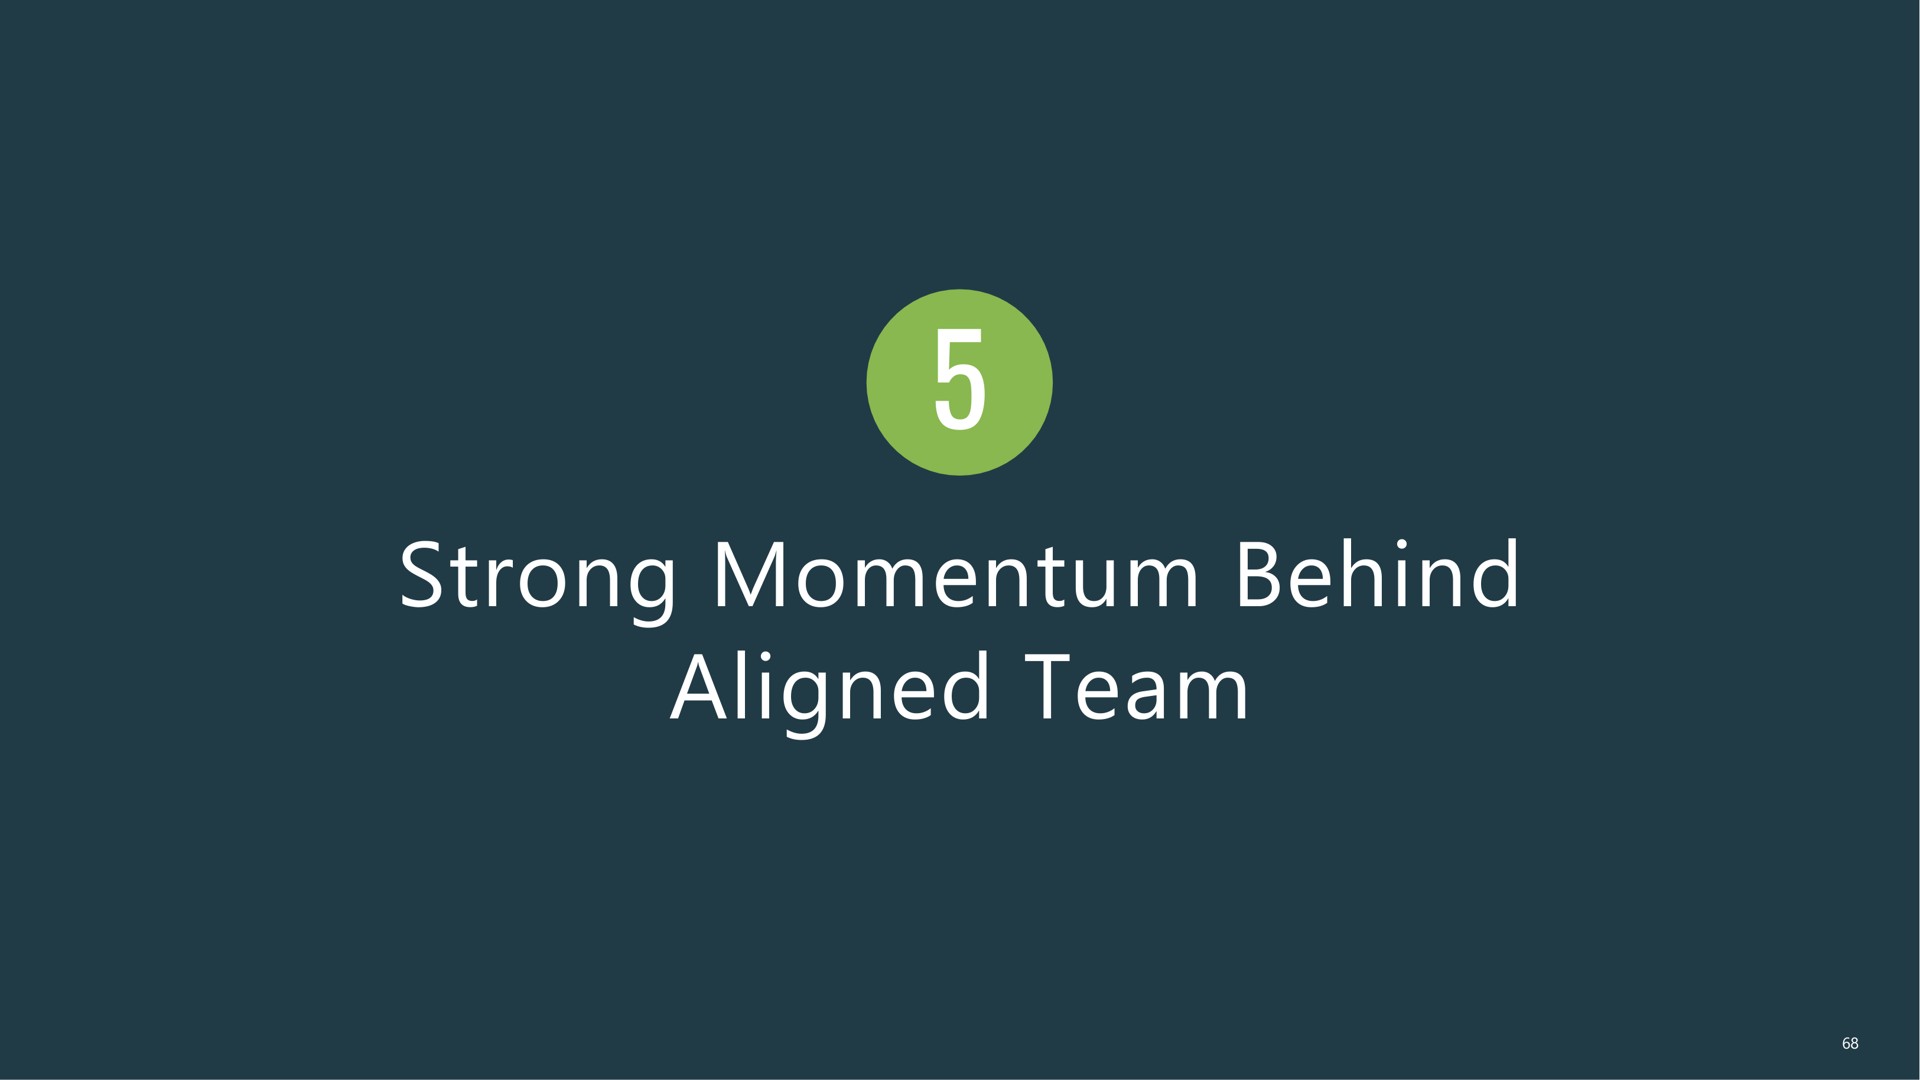 strong momentum behind aligned team | Apollo Global Management